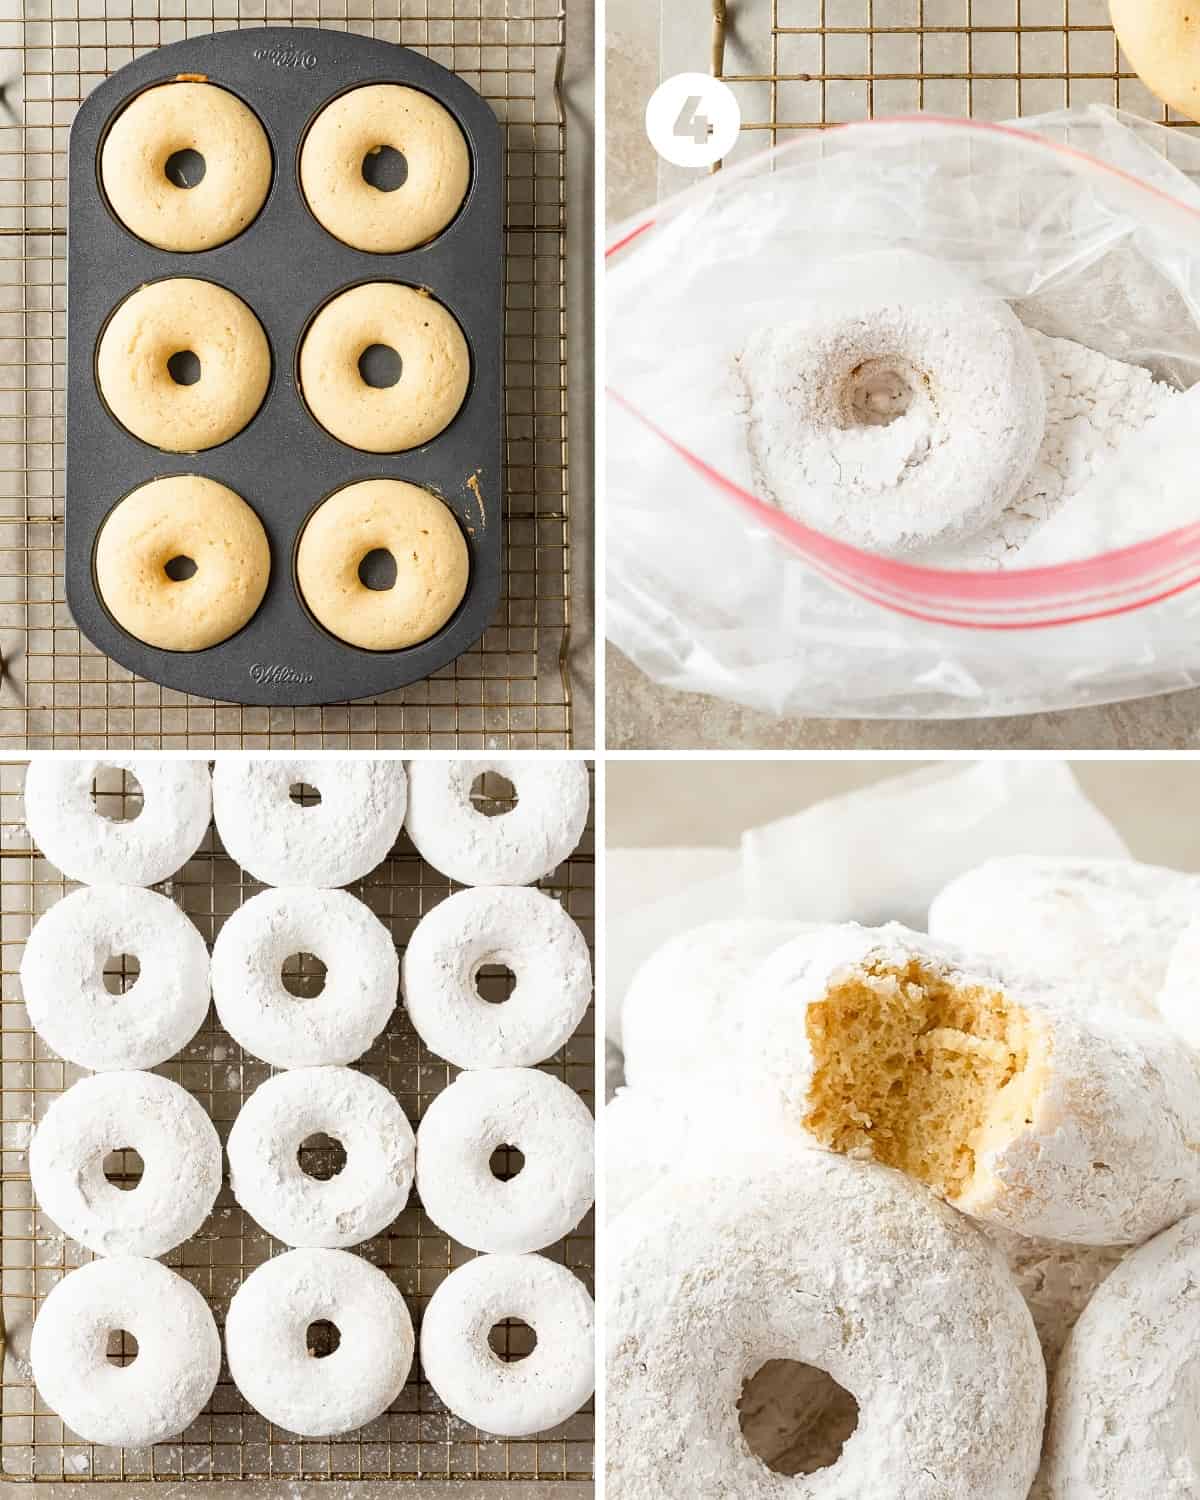 Pour the powdered sugar into a clean ziplock bag. While the donuts are still warm, toss one at a time into the powdered sugar until well coated. Transfer the powdered sugar donut back onto the cooling rack. Repeat until all the donuts are coated in the powdered sugar and enjoy!